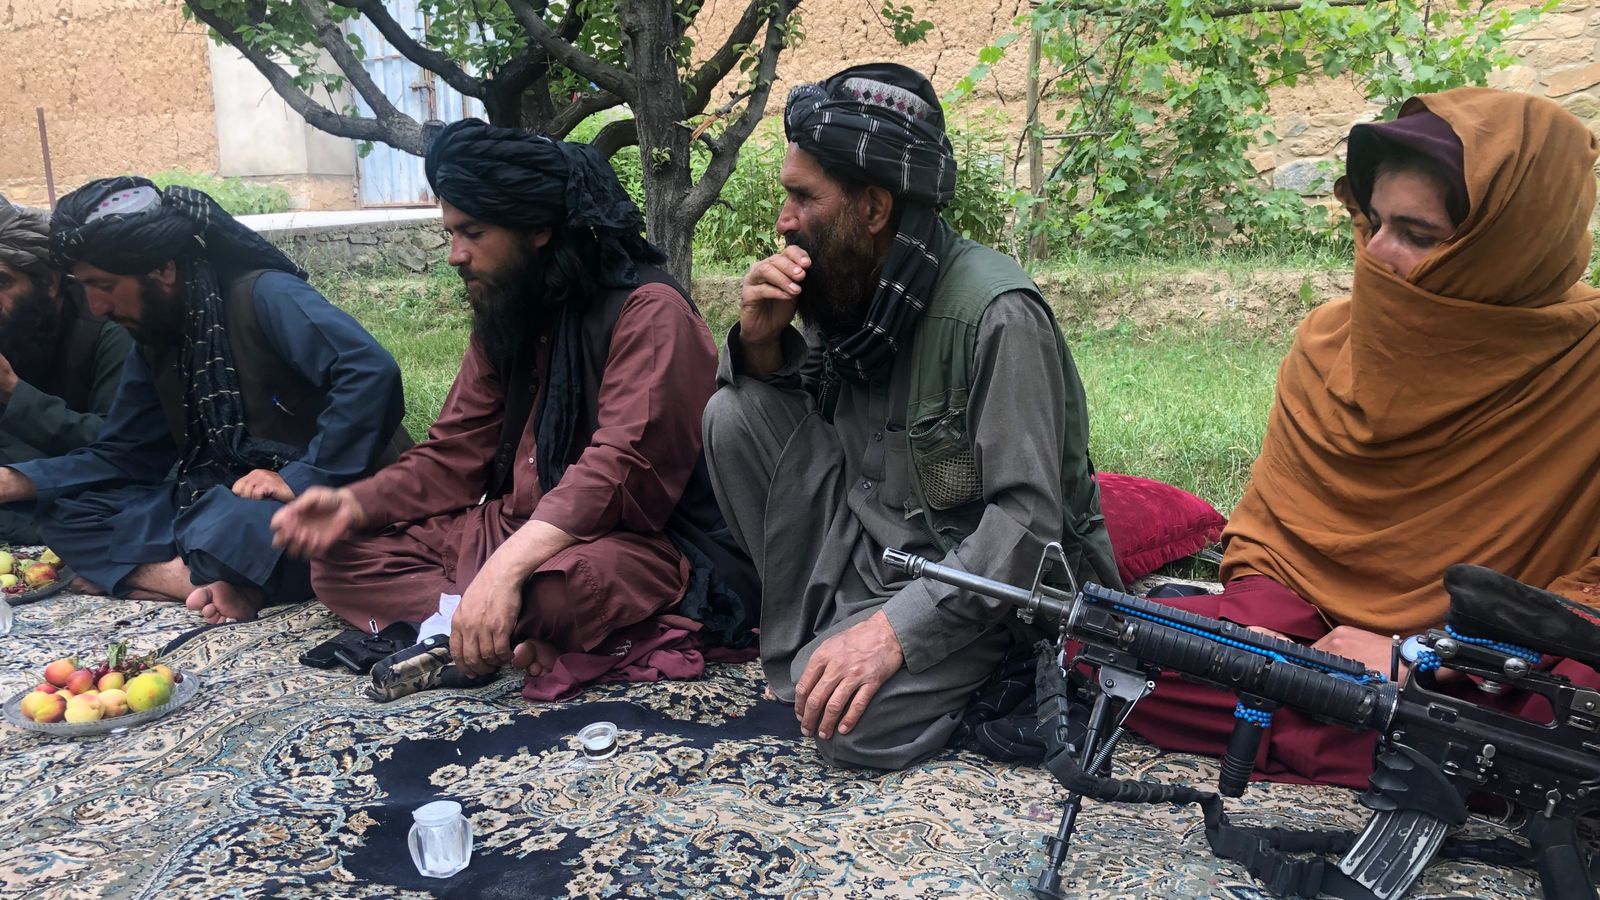 The Taliban are making gains in Afghanistan – and showing off their progress to the world